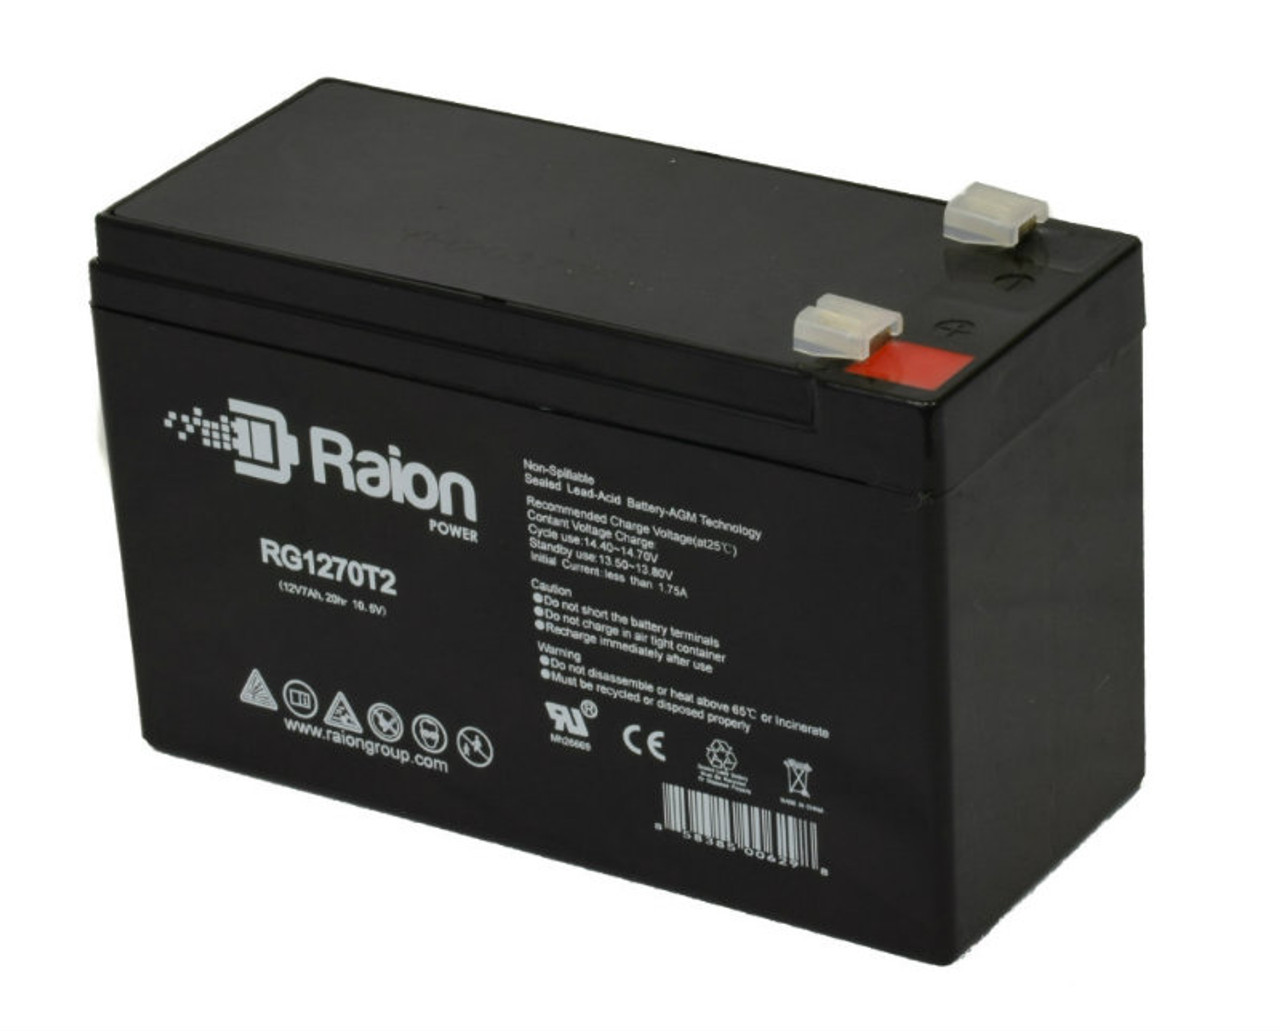 Raion Power RG1270T1 12V 7Ah Non-Spillable Replacement Battery for Kung Long WP8-12